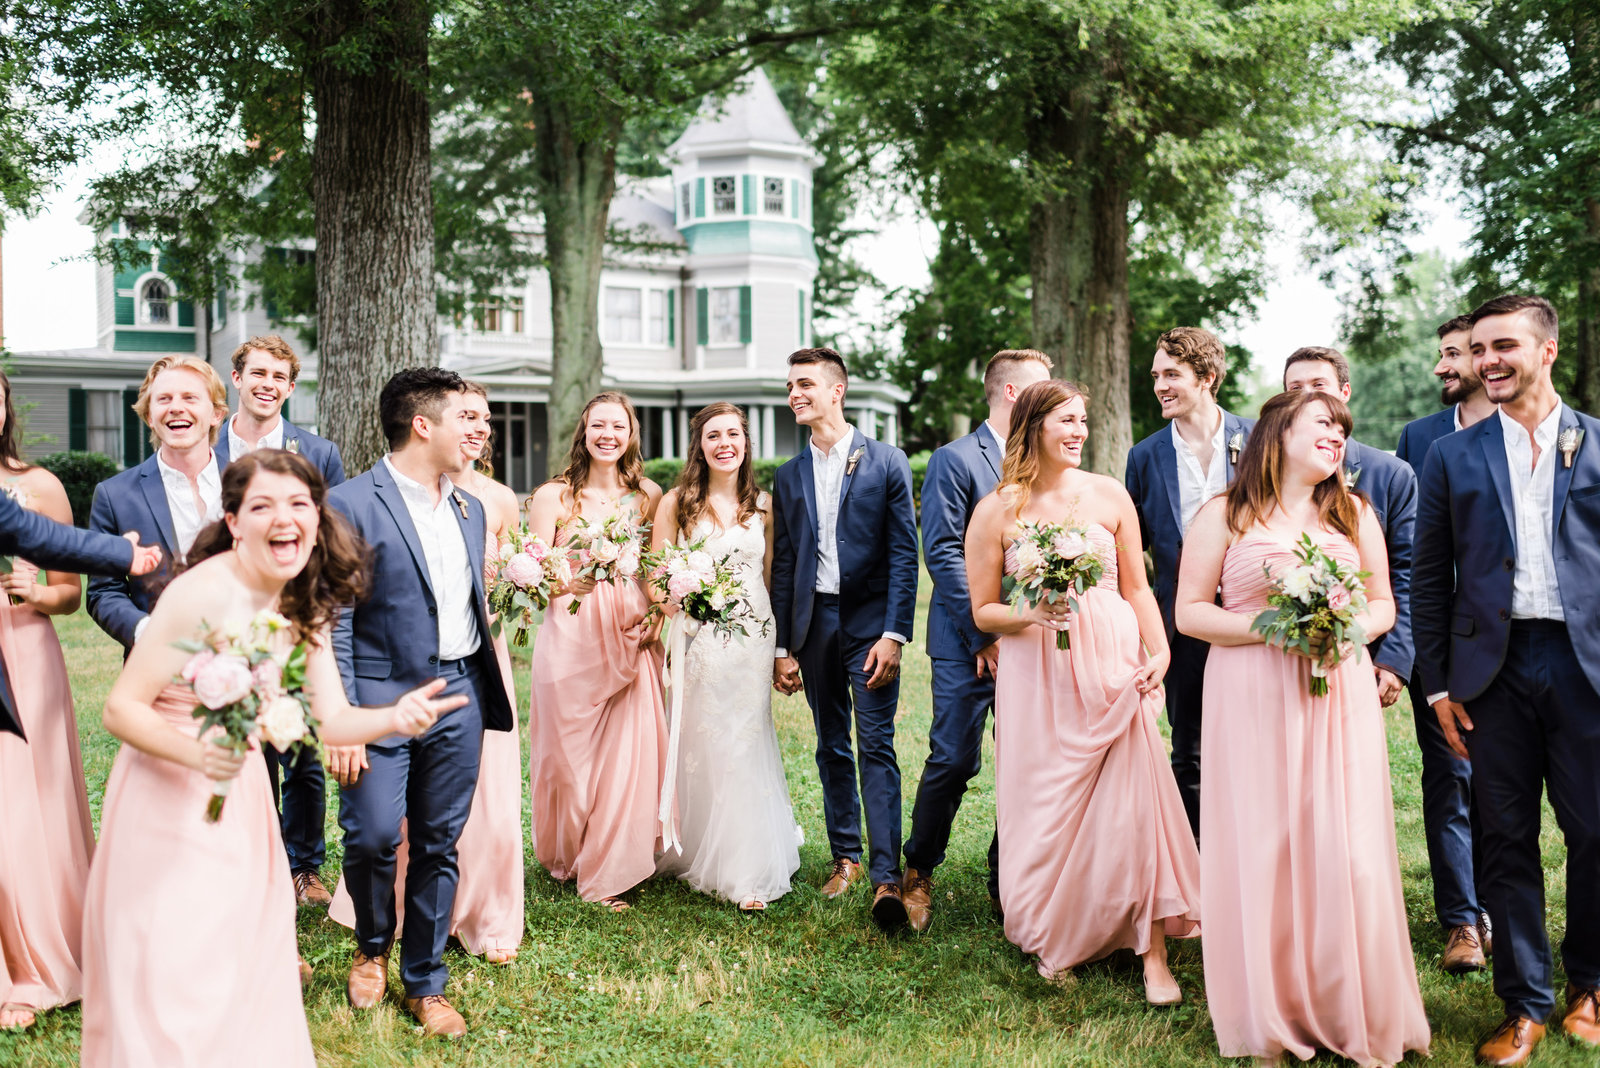 Lindsay + Chris | Family Formals and Bridal Party -16